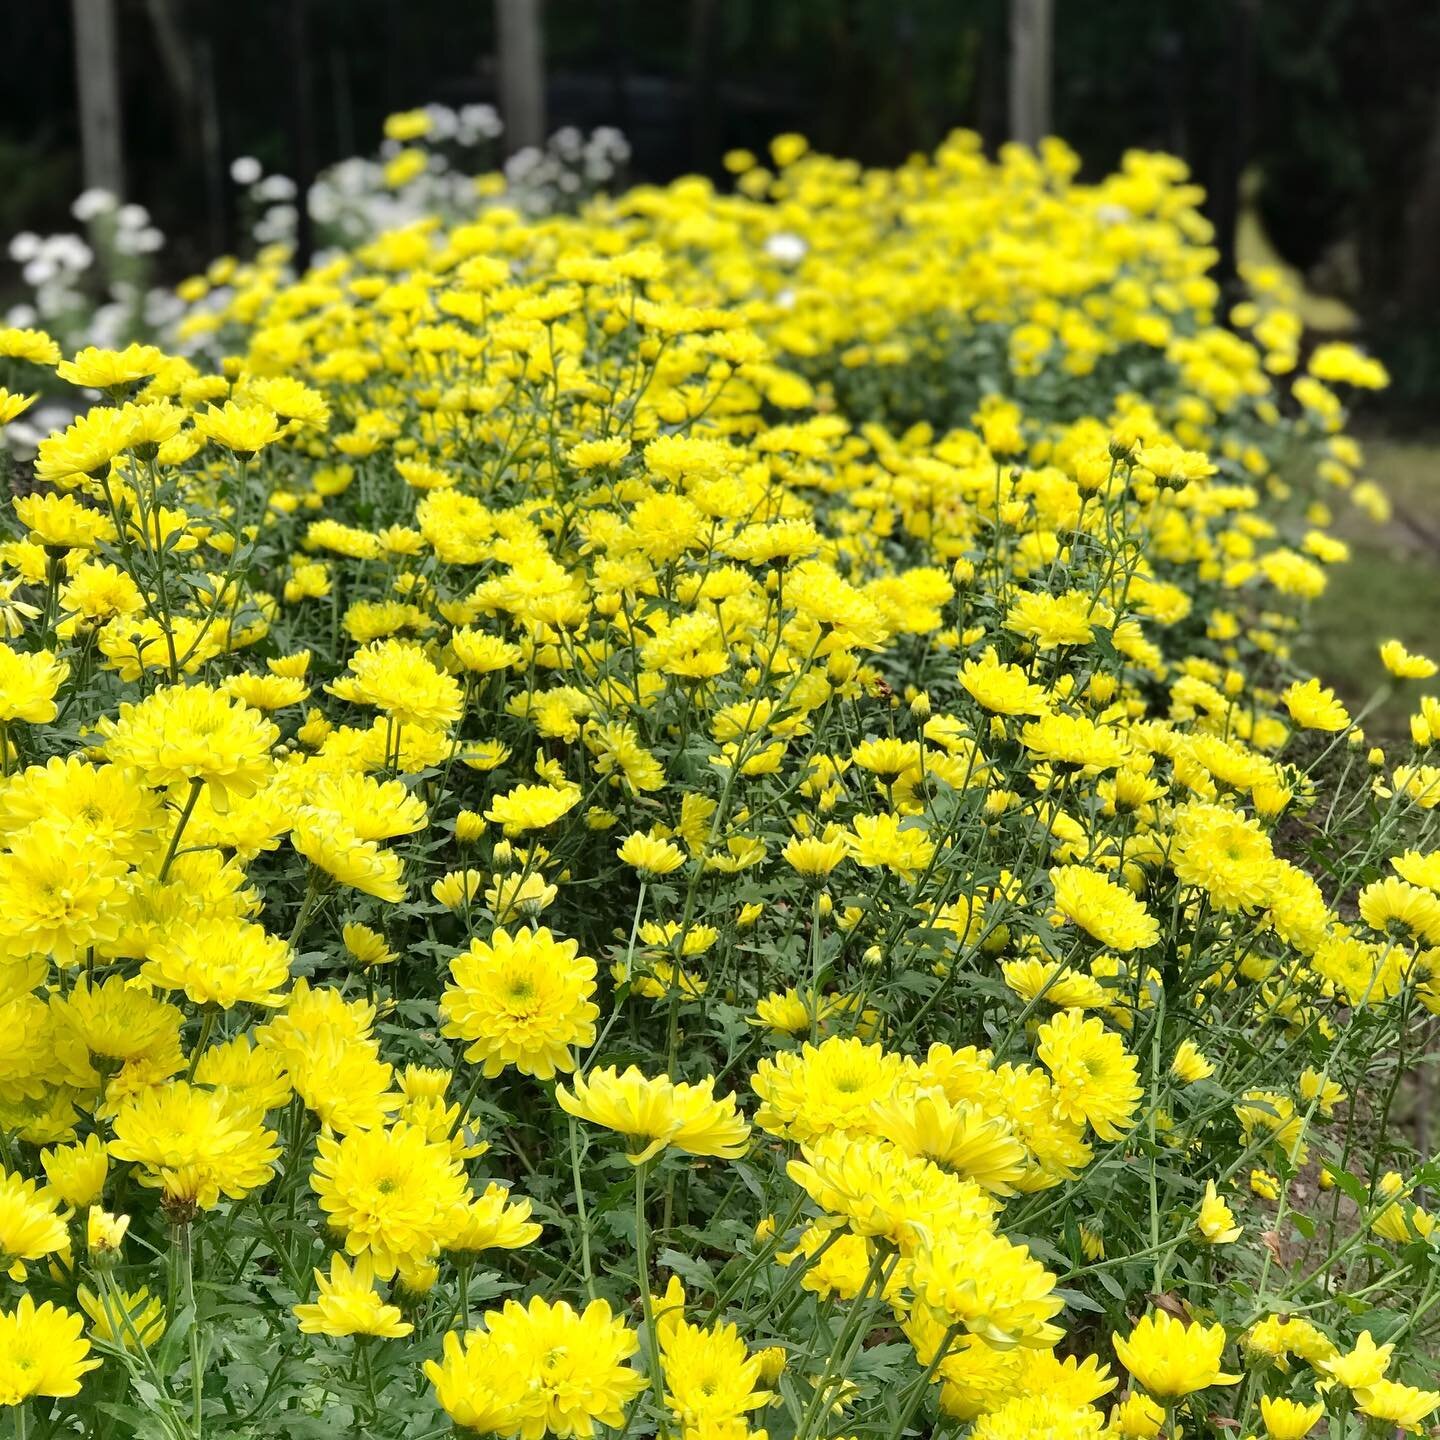 I&rsquo;m on the final push towards Mother&rsquo;s Day weekend 💫

One final harvest of the yellow chrysanthemum bed late this afternoon. Deliveries scheduled for tomorrow, and I&rsquo;m calling it done for 2023.

Thank you once again to all of my ve